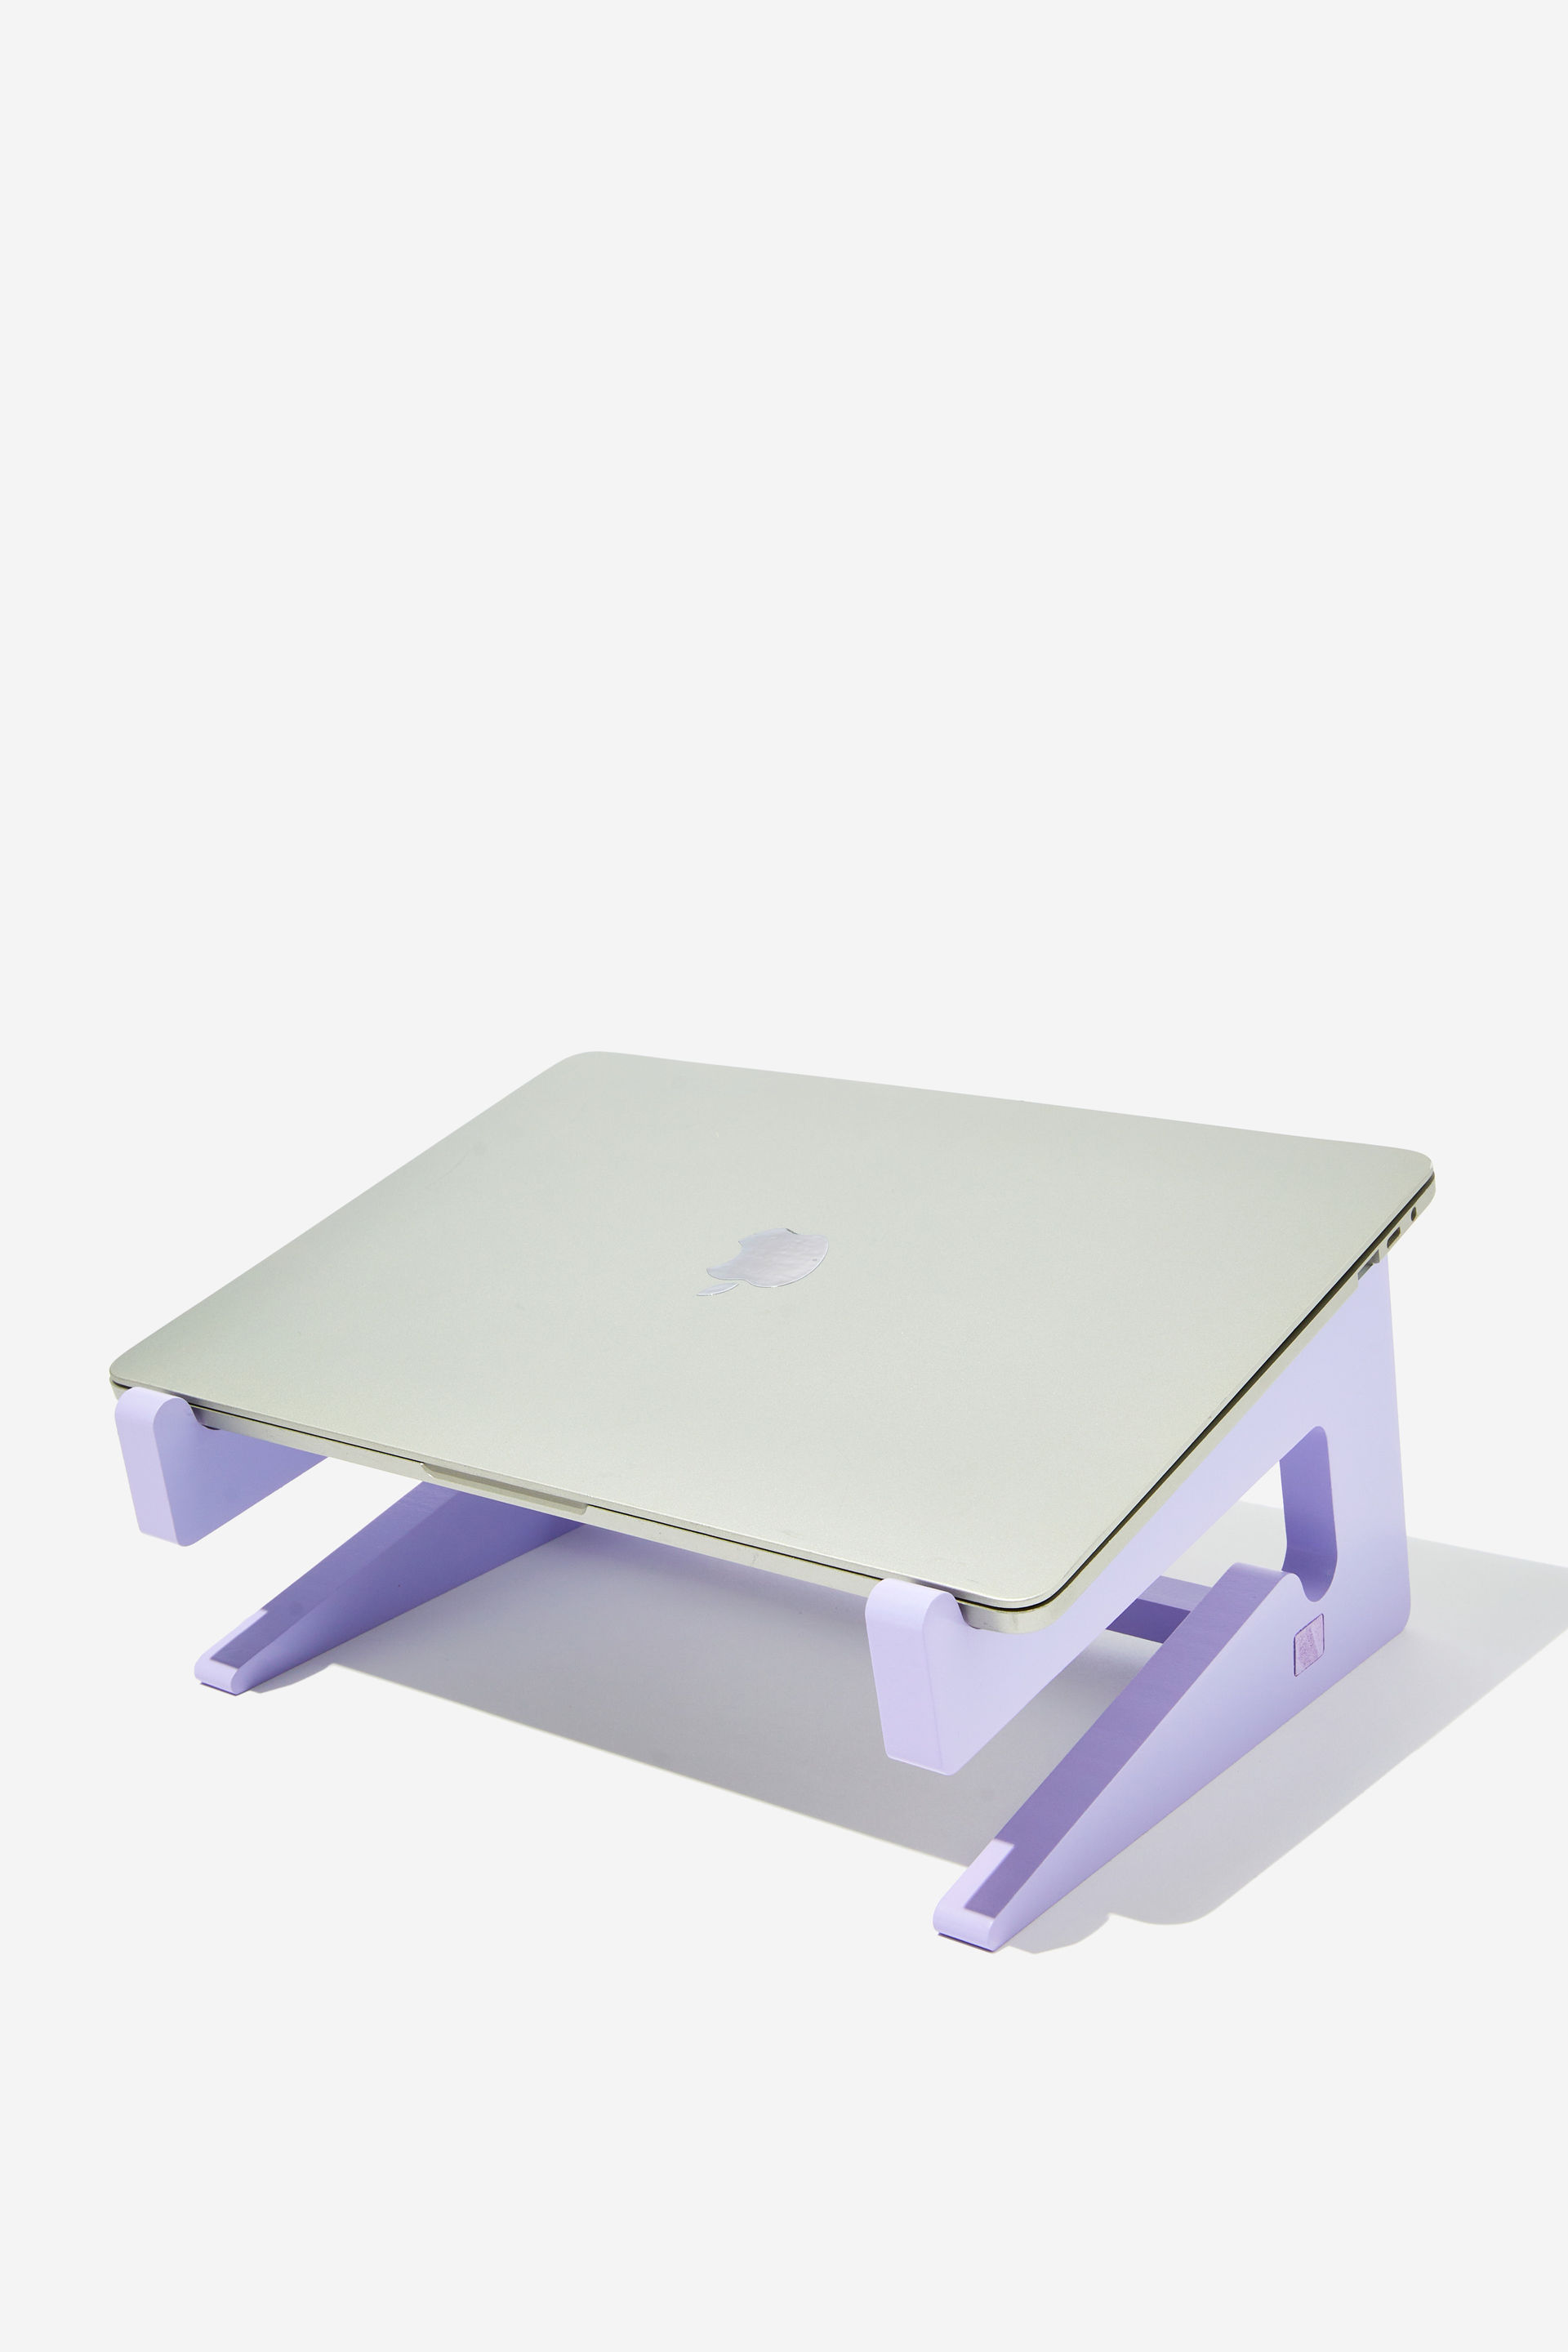 Typo - Collapsible Laptop Stand - Soft lilac